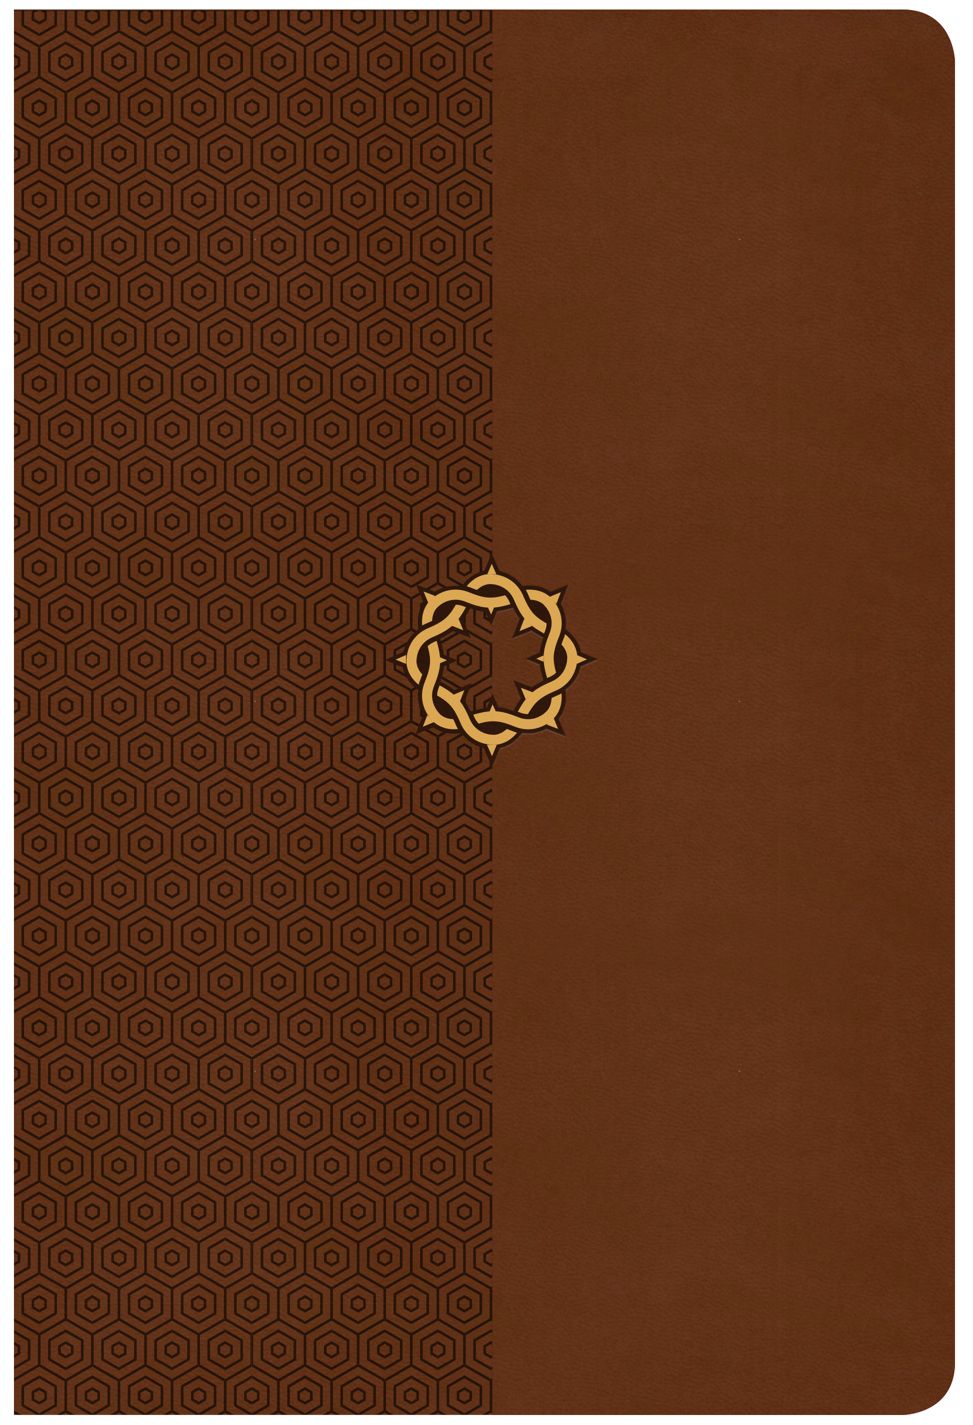 CSB Essential Teen Study Bible, Walnut LeatherTouch